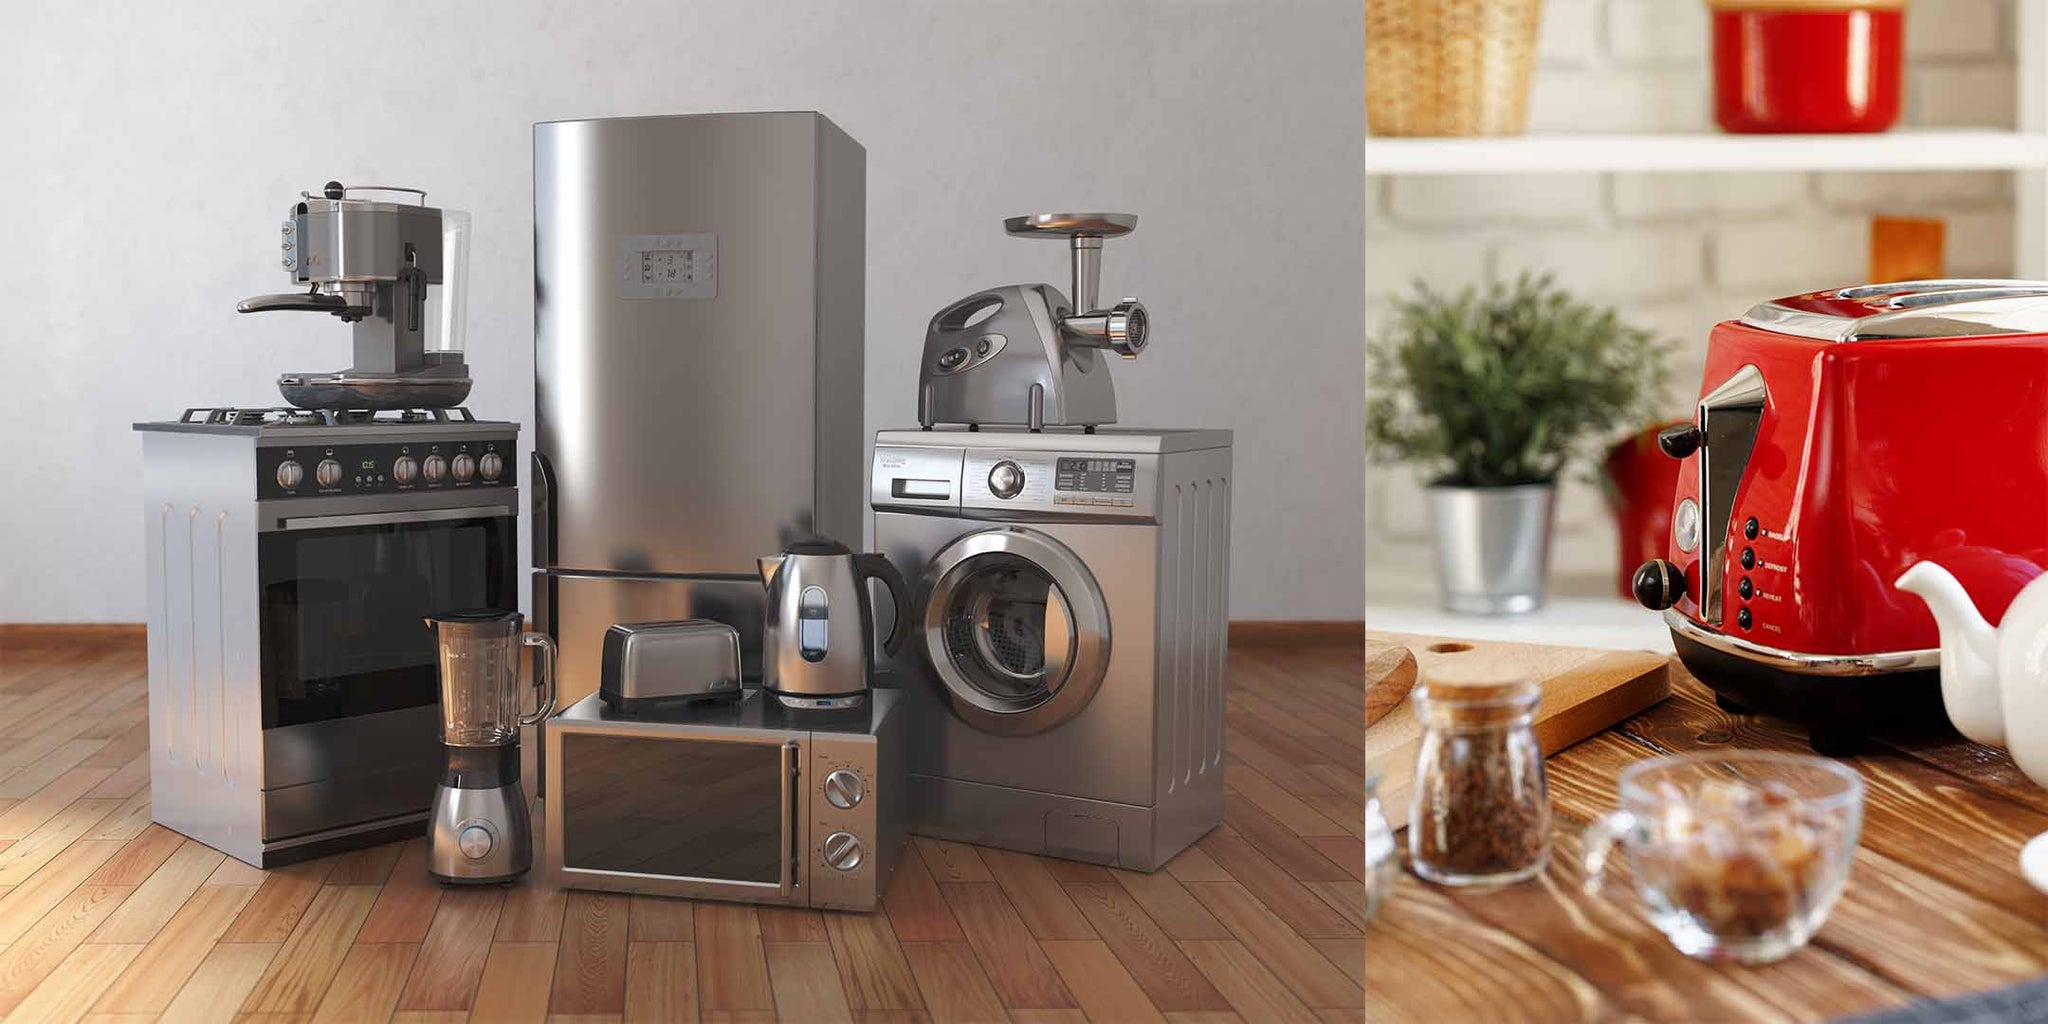 The Best Presents for Foodies- Medium Sized Kitchen Appliances